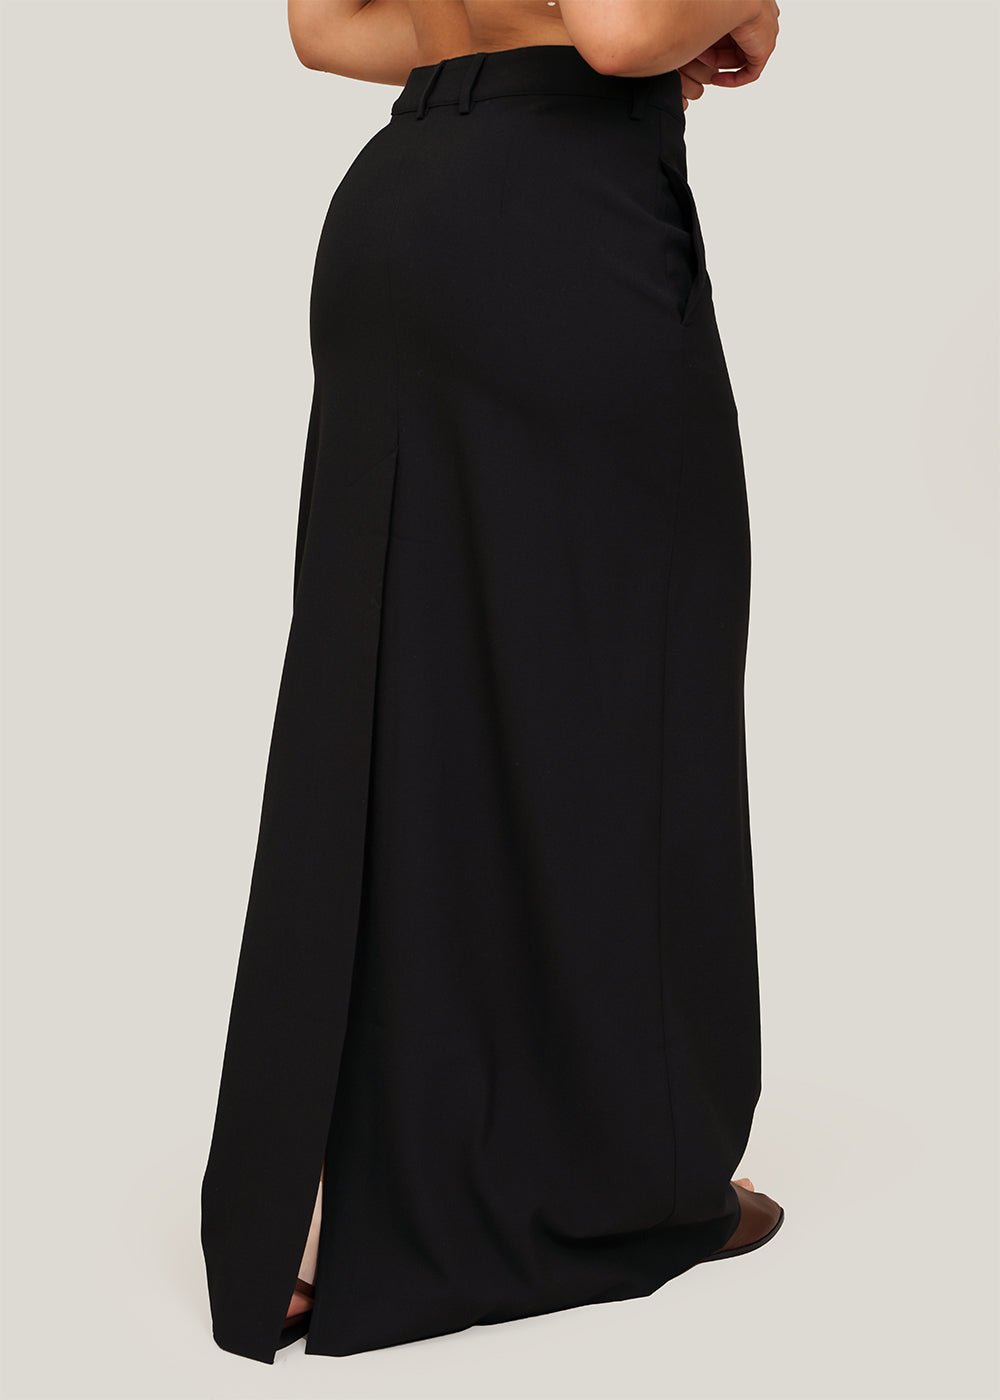 Beaufille Black Minter Maxi Skirt - New Classics Studios Sustainable Ethical Fashion Canada